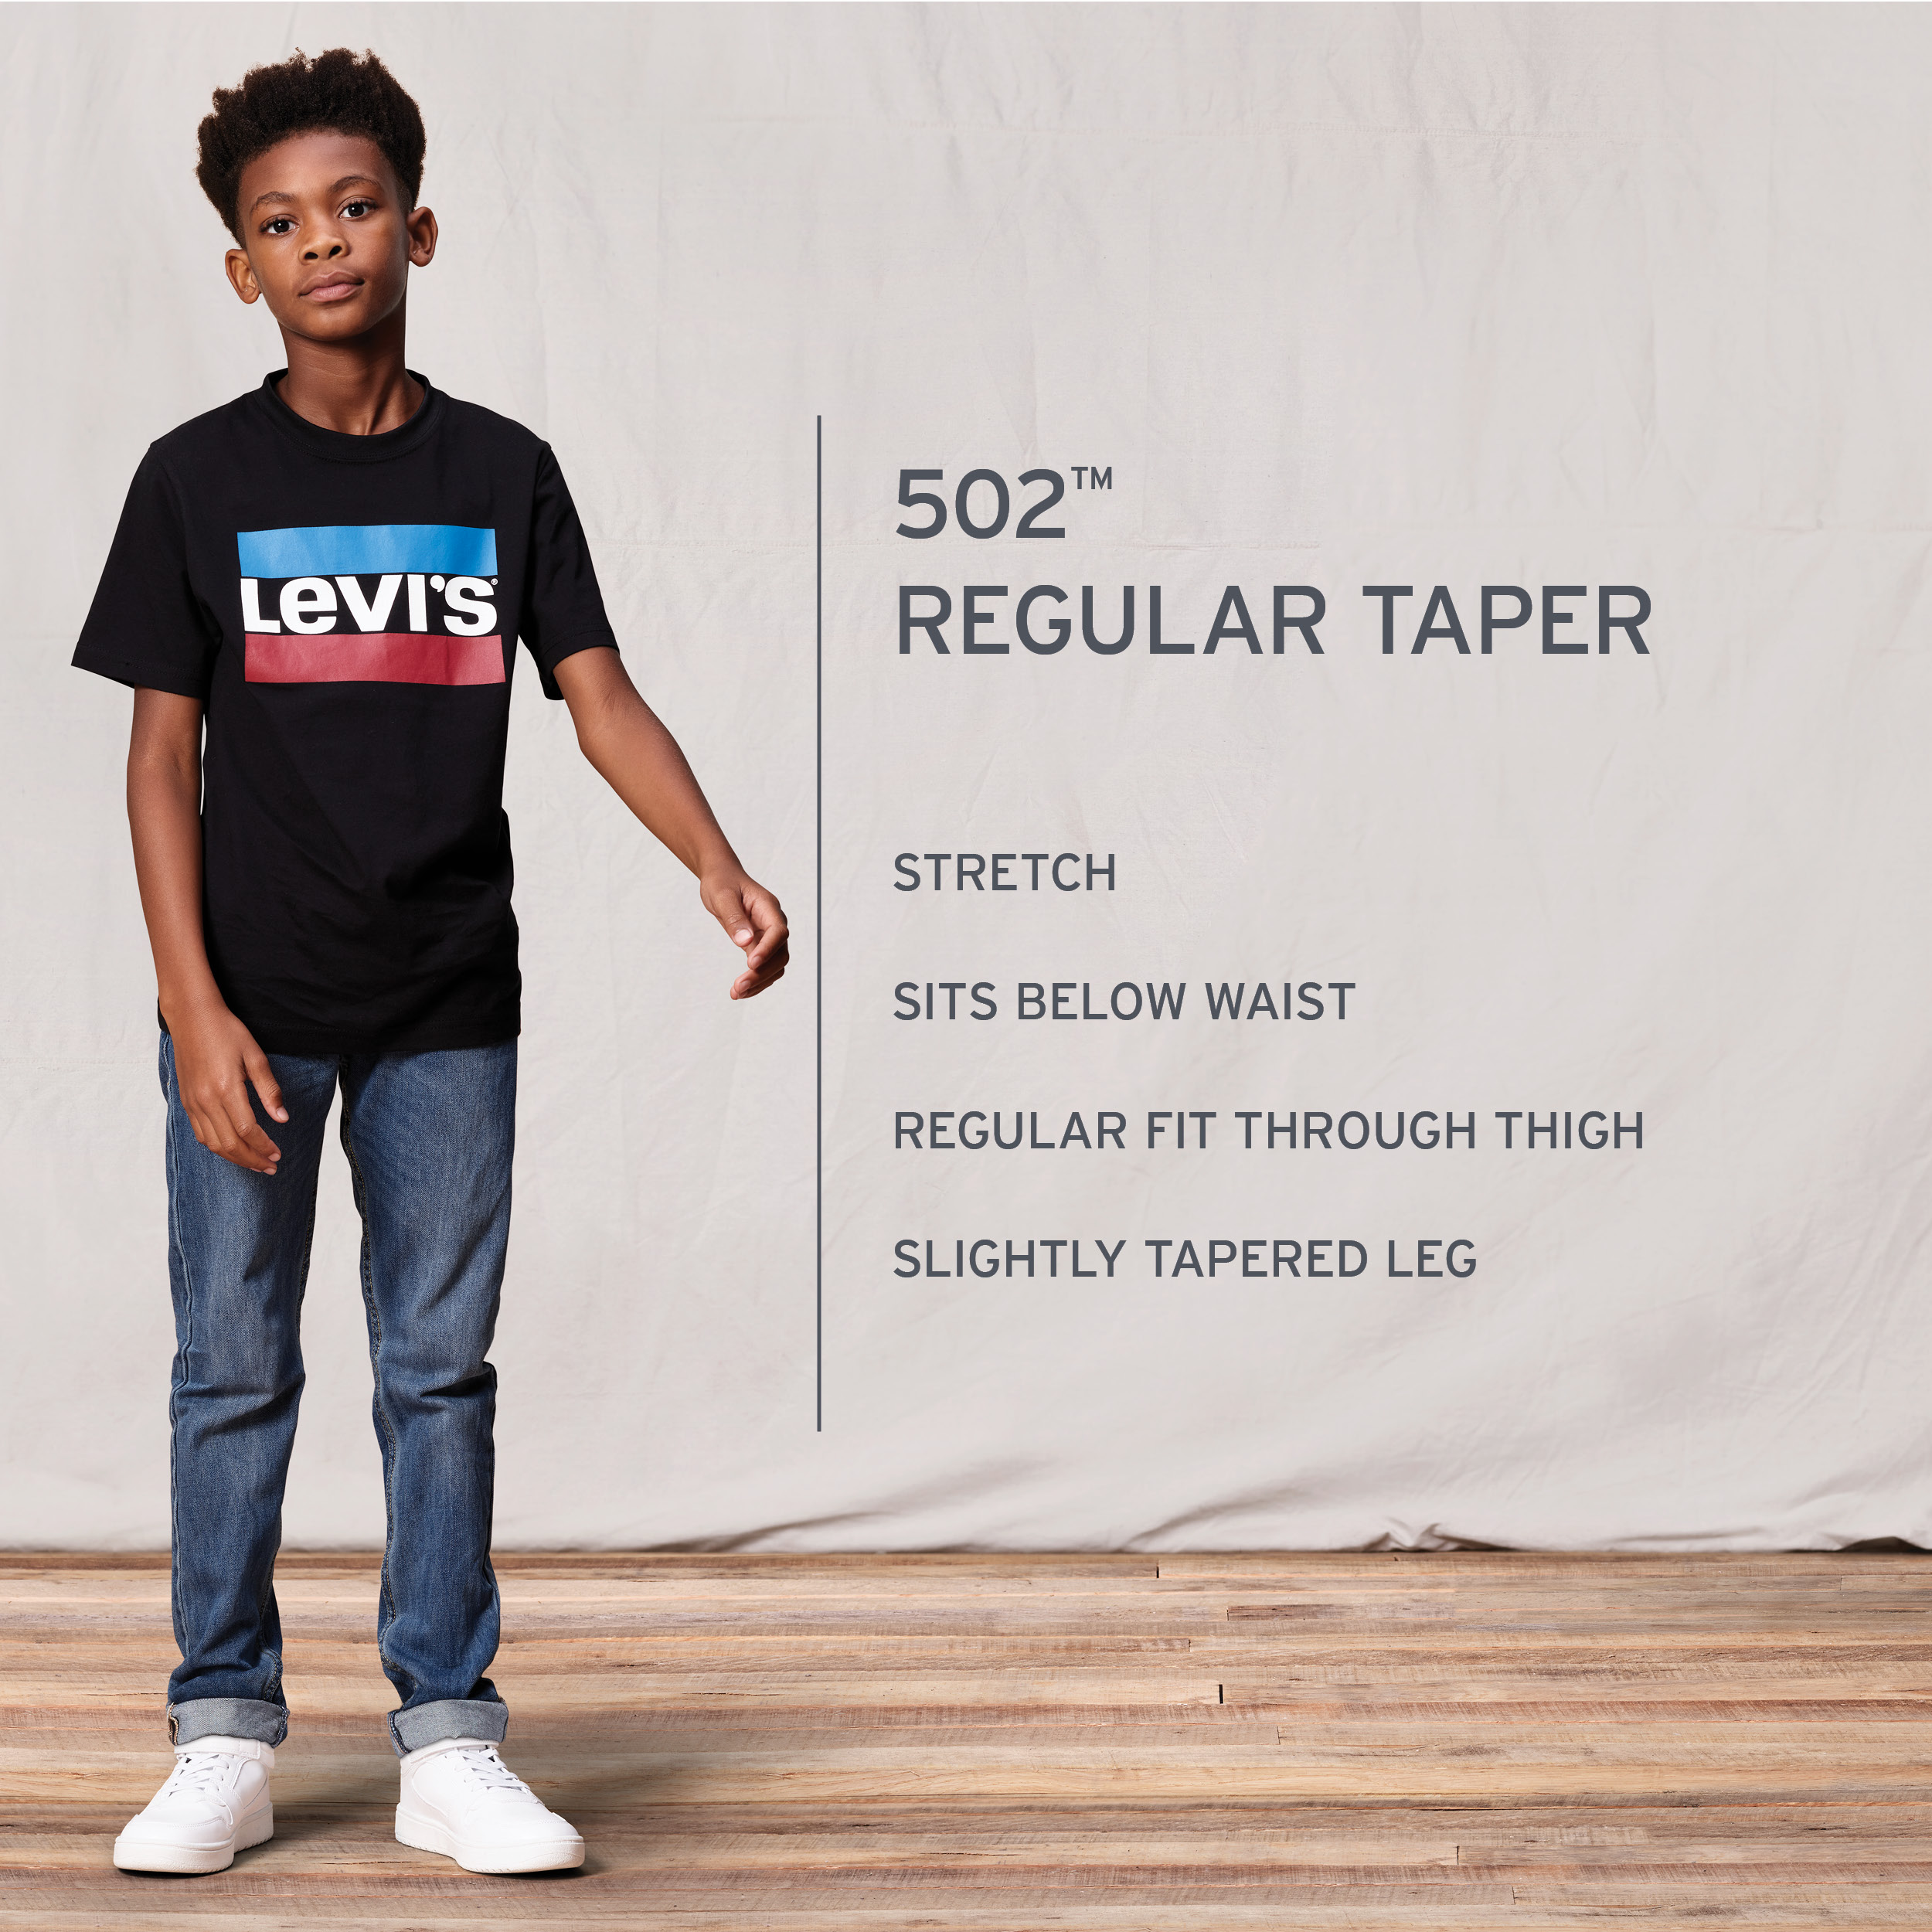 Levi's Boys' Regular Taper Fit Jeans, Sizes 4-20 - image 3 of 13